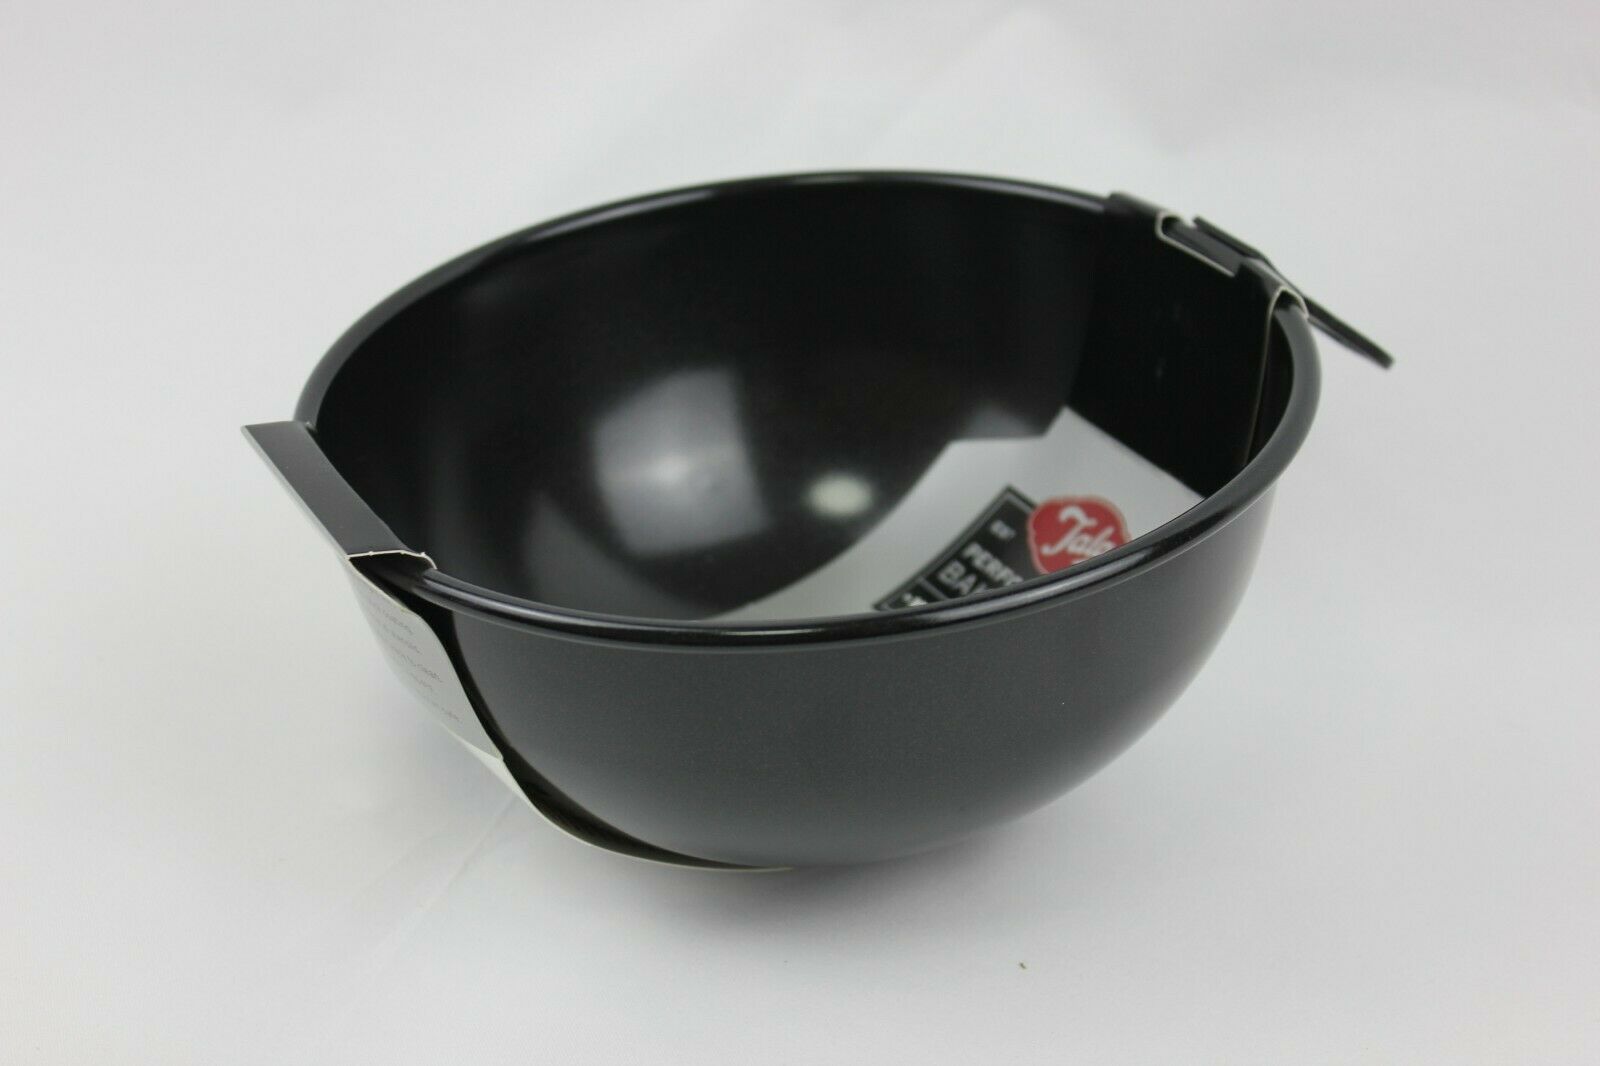 attachment-https://www.cupcakeaddicts.co.uk/wp-content/uploads/imported/6/2-Tala-Performance-Bakeware-Sphere-Round-Ball-Soccer-Non-Stick-Cake-Pan-Tin-18cm-324484383606-5.jpg